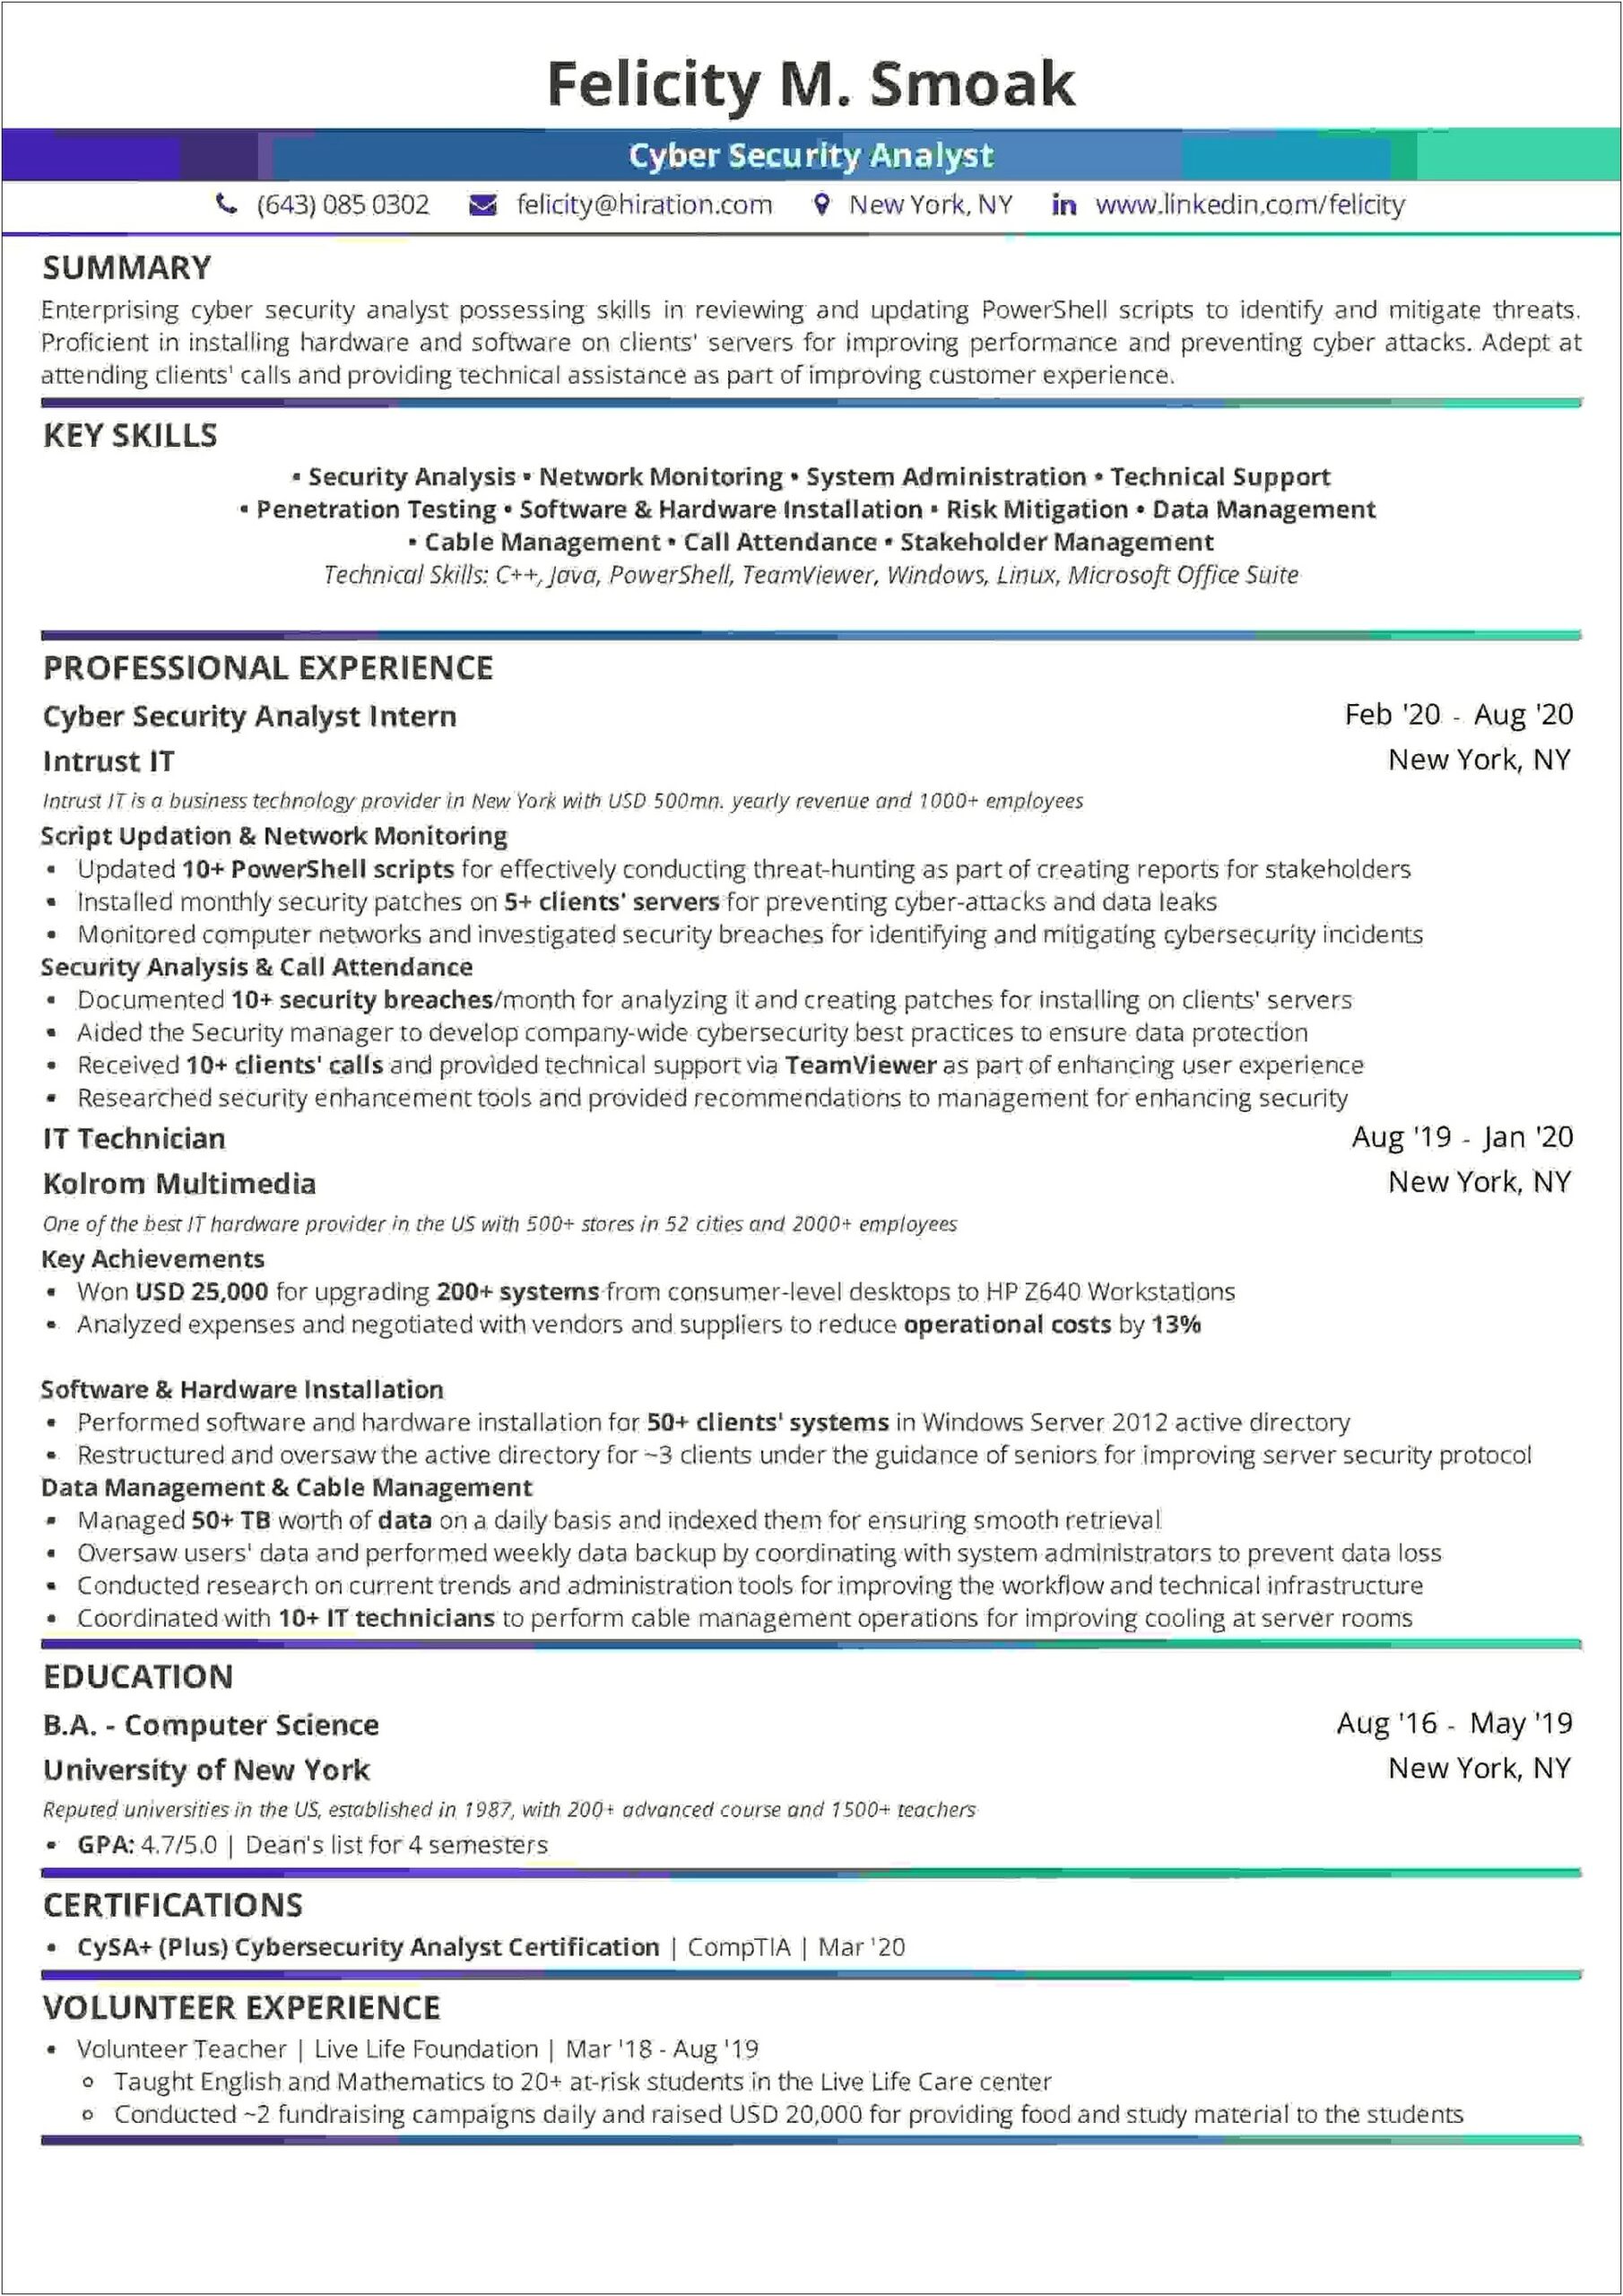 Sample Resume For Entry Level Cyber Security